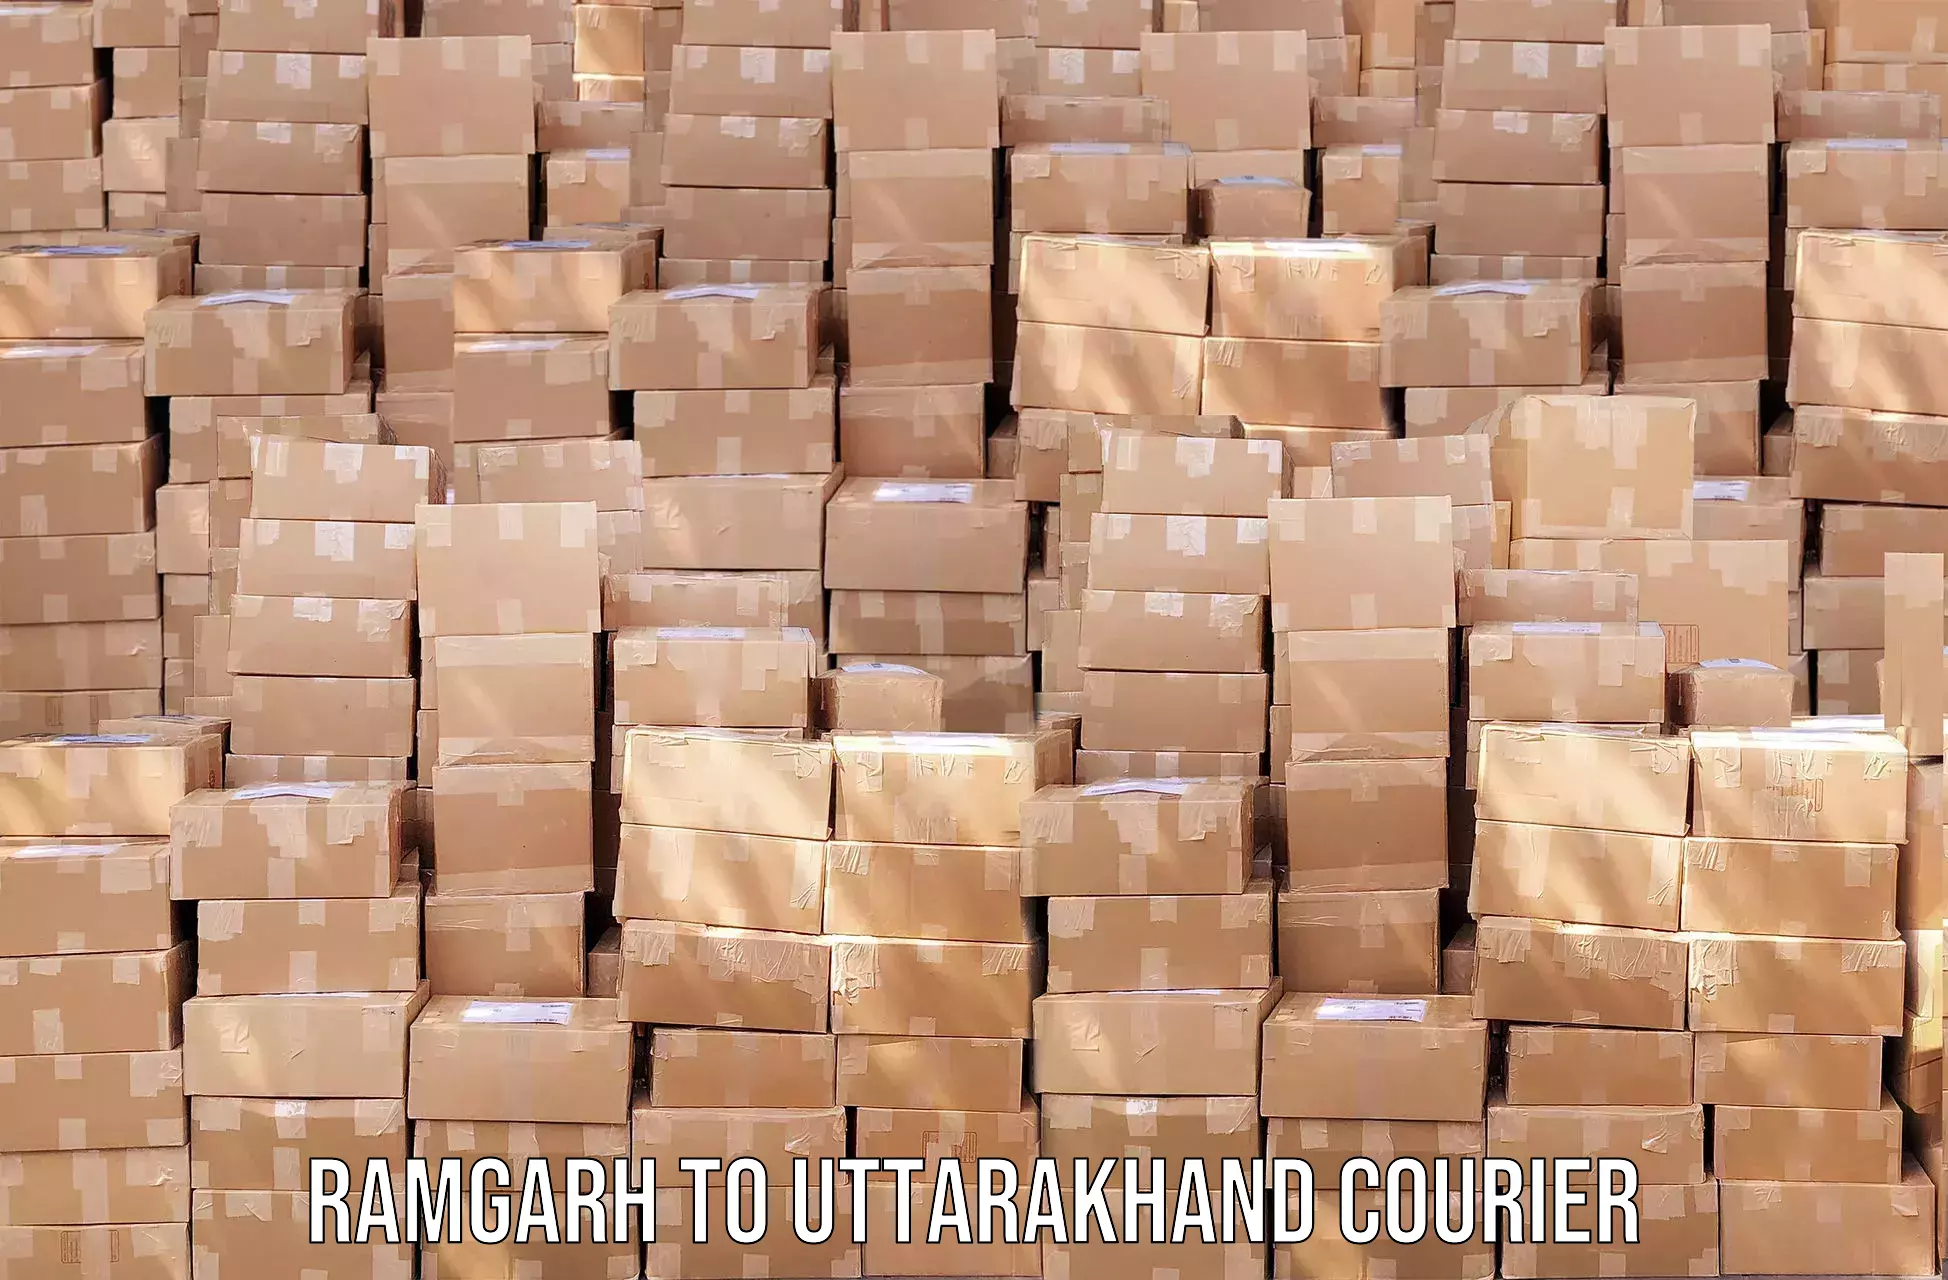 Efficient parcel service Ramgarh to Rishikesh